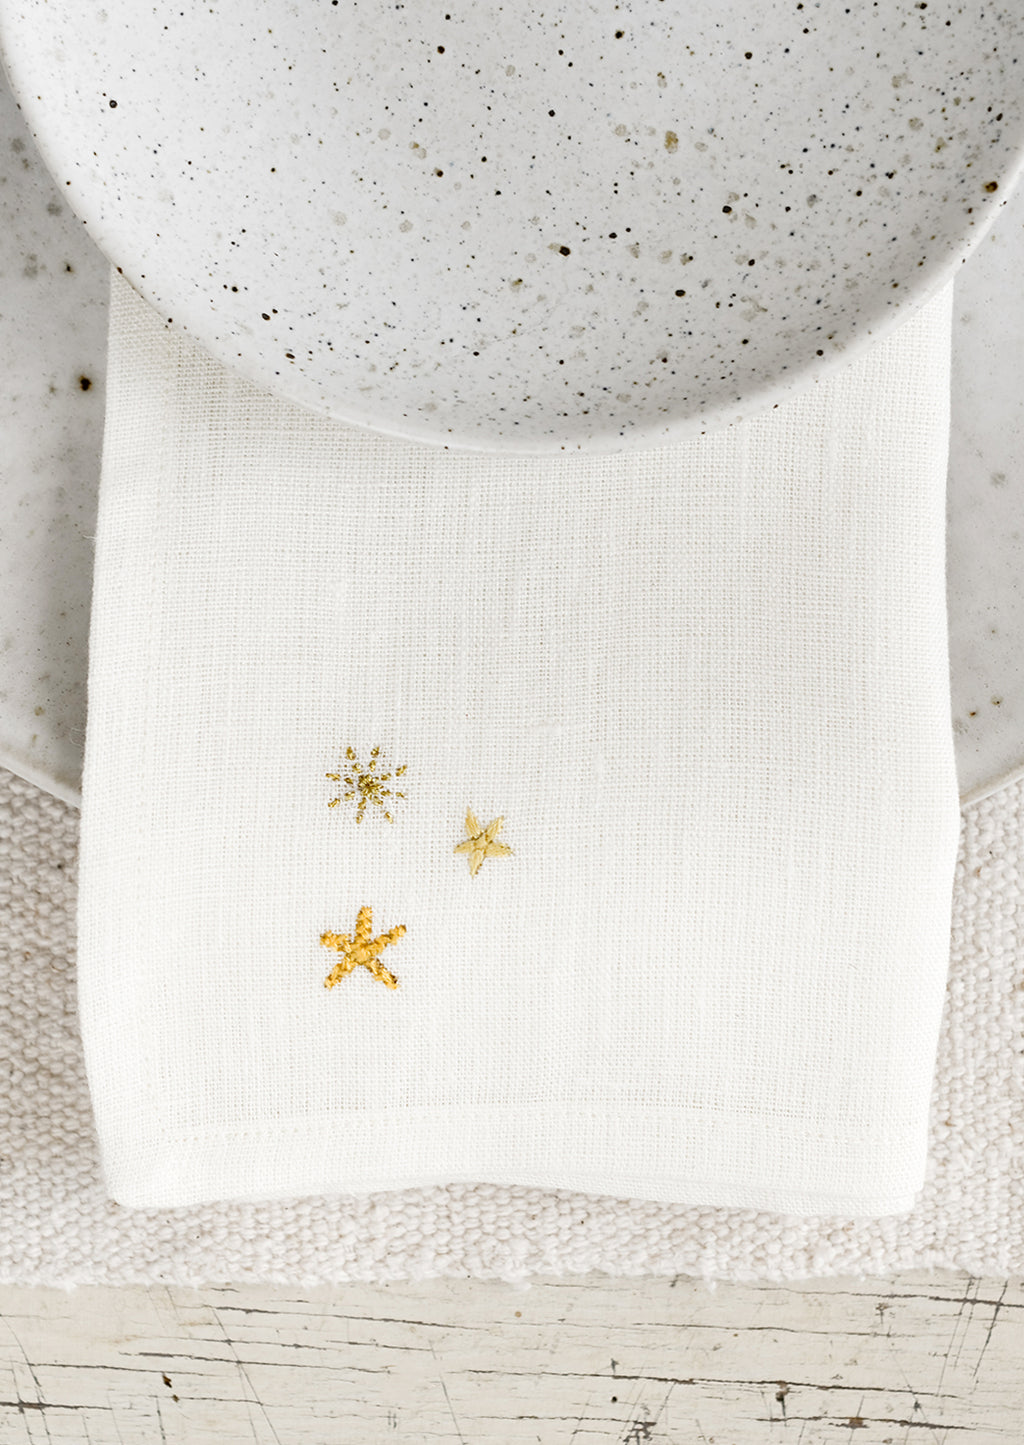 2: A white napkin with three embroidered stars.